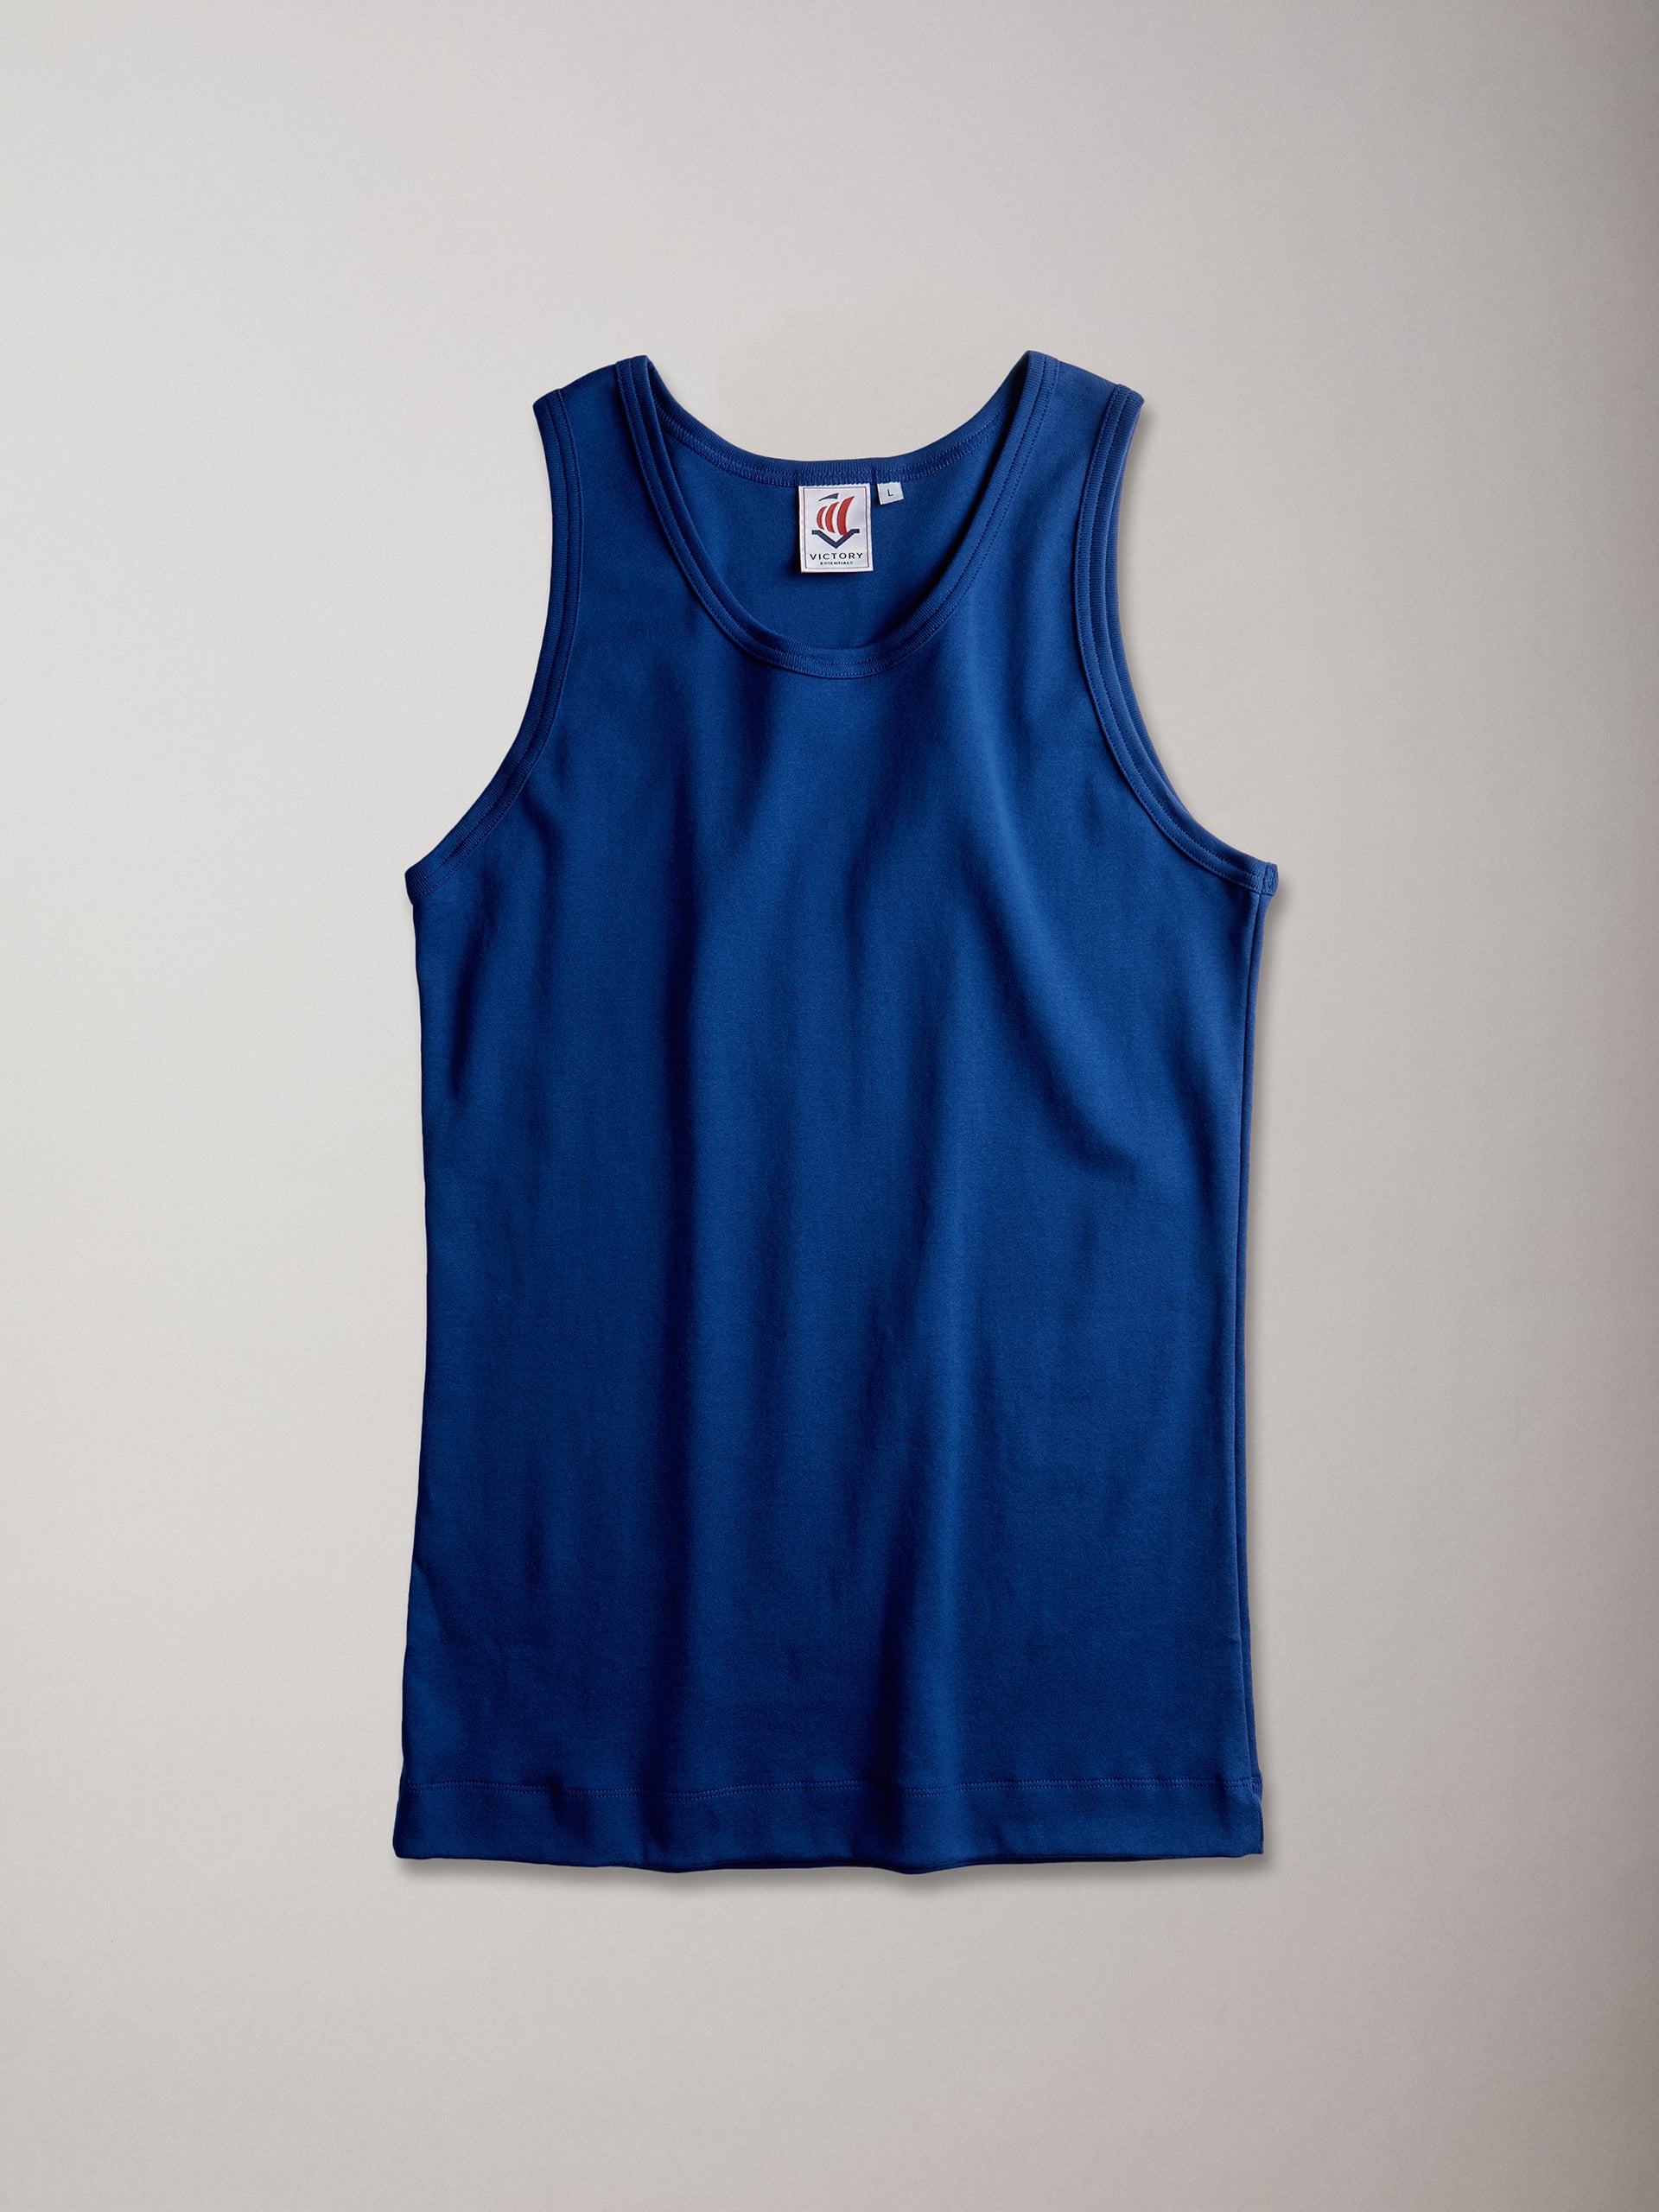 Ripple Effect Terry Tank Top in Blue